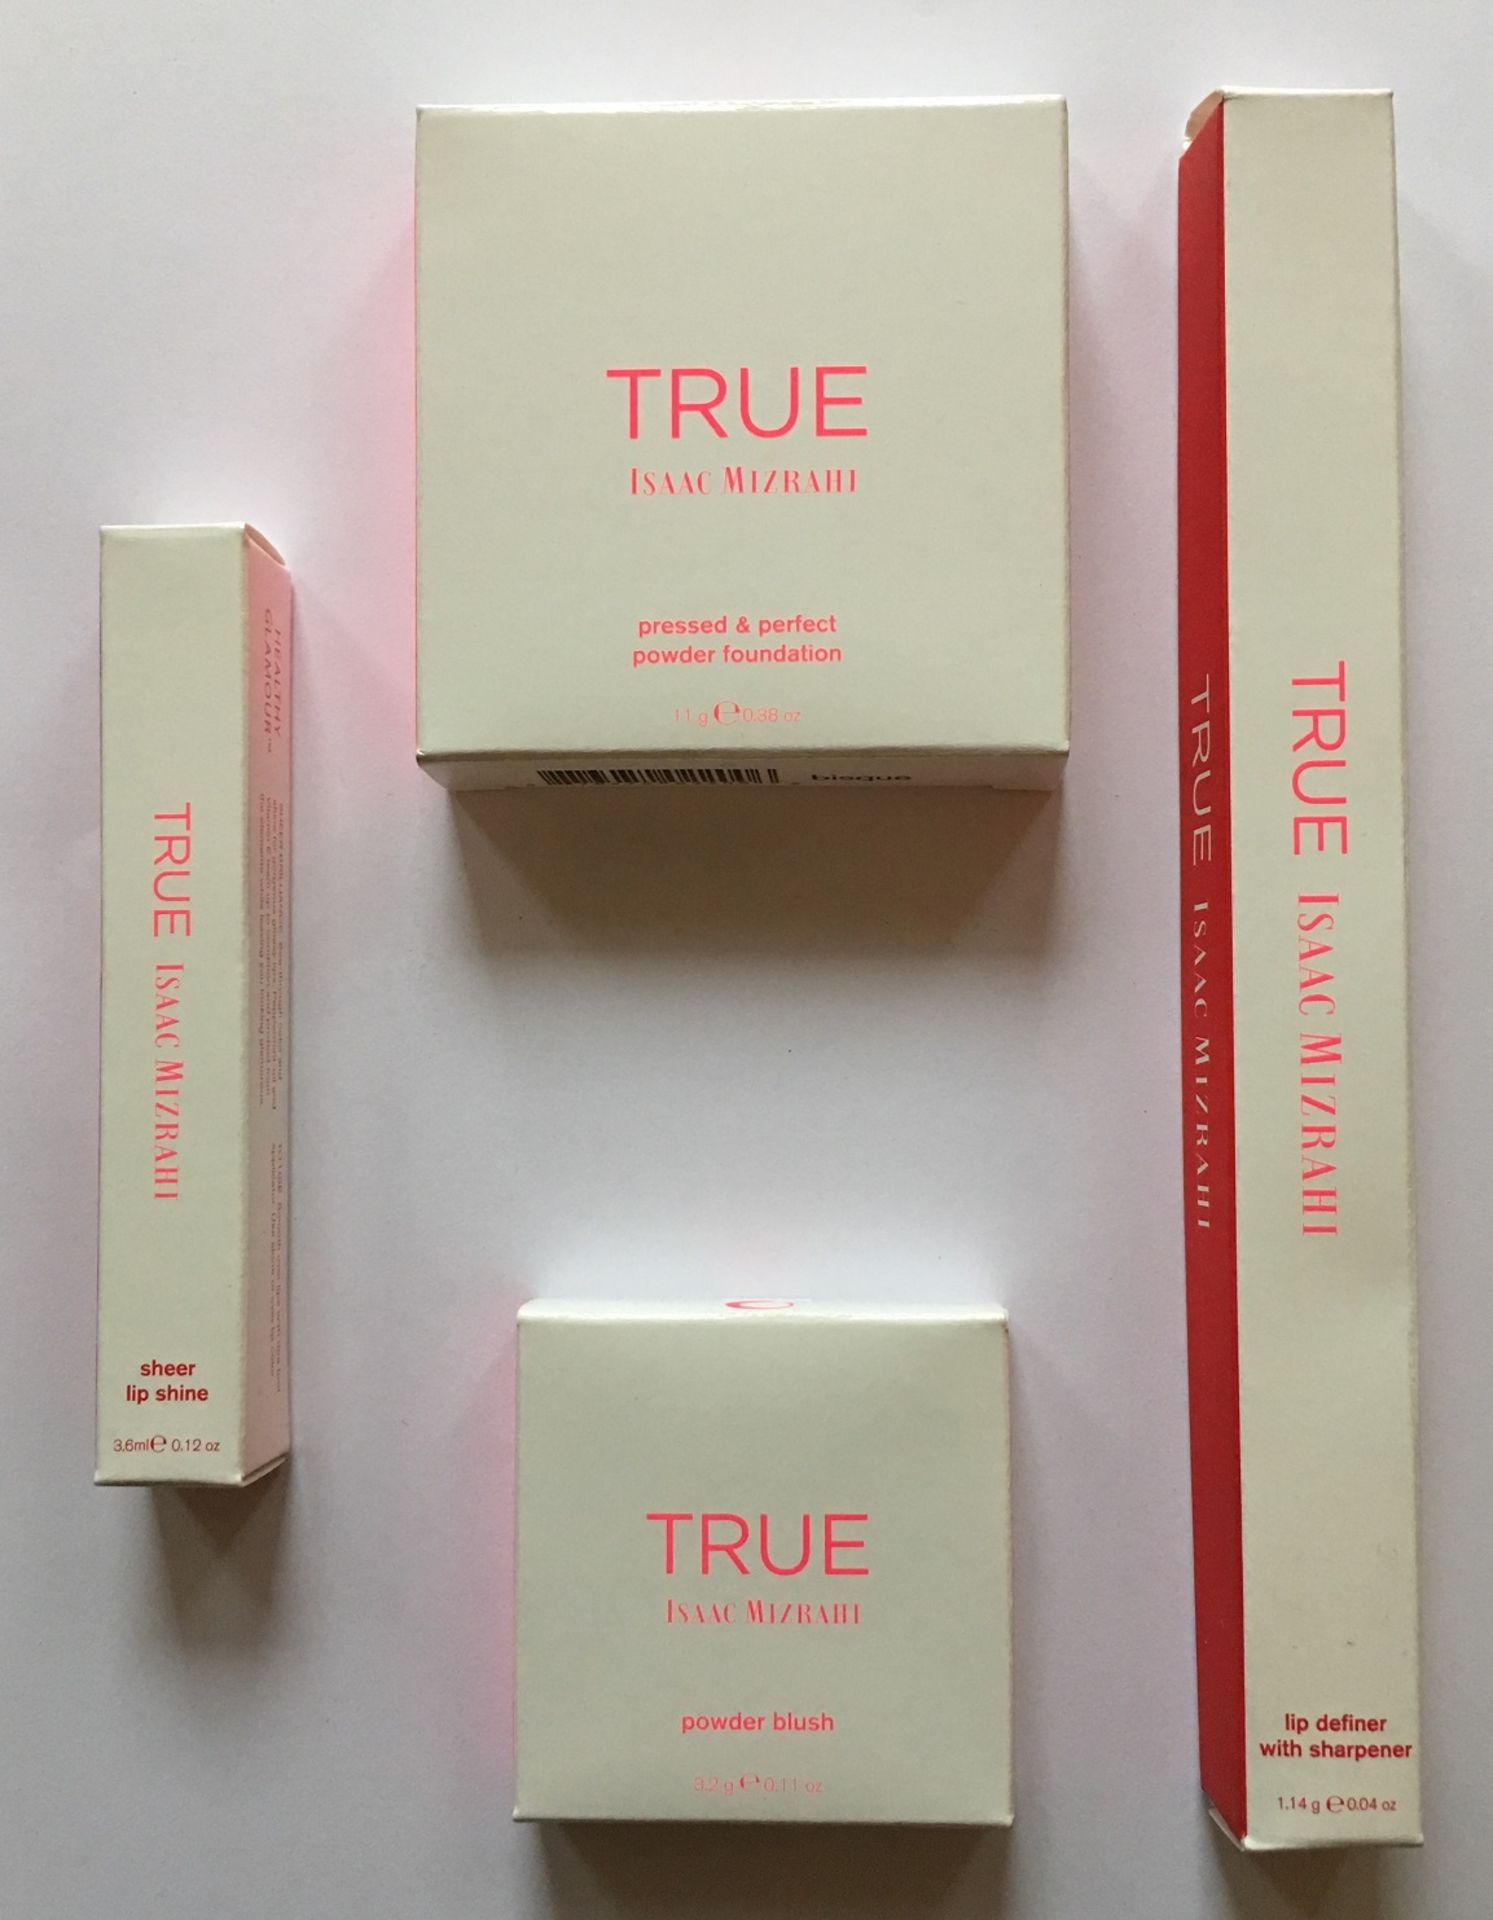 100 x True by Issac Mizrahi – 4 Gift Item Set RRP £60 per set Each set is individually packed in a